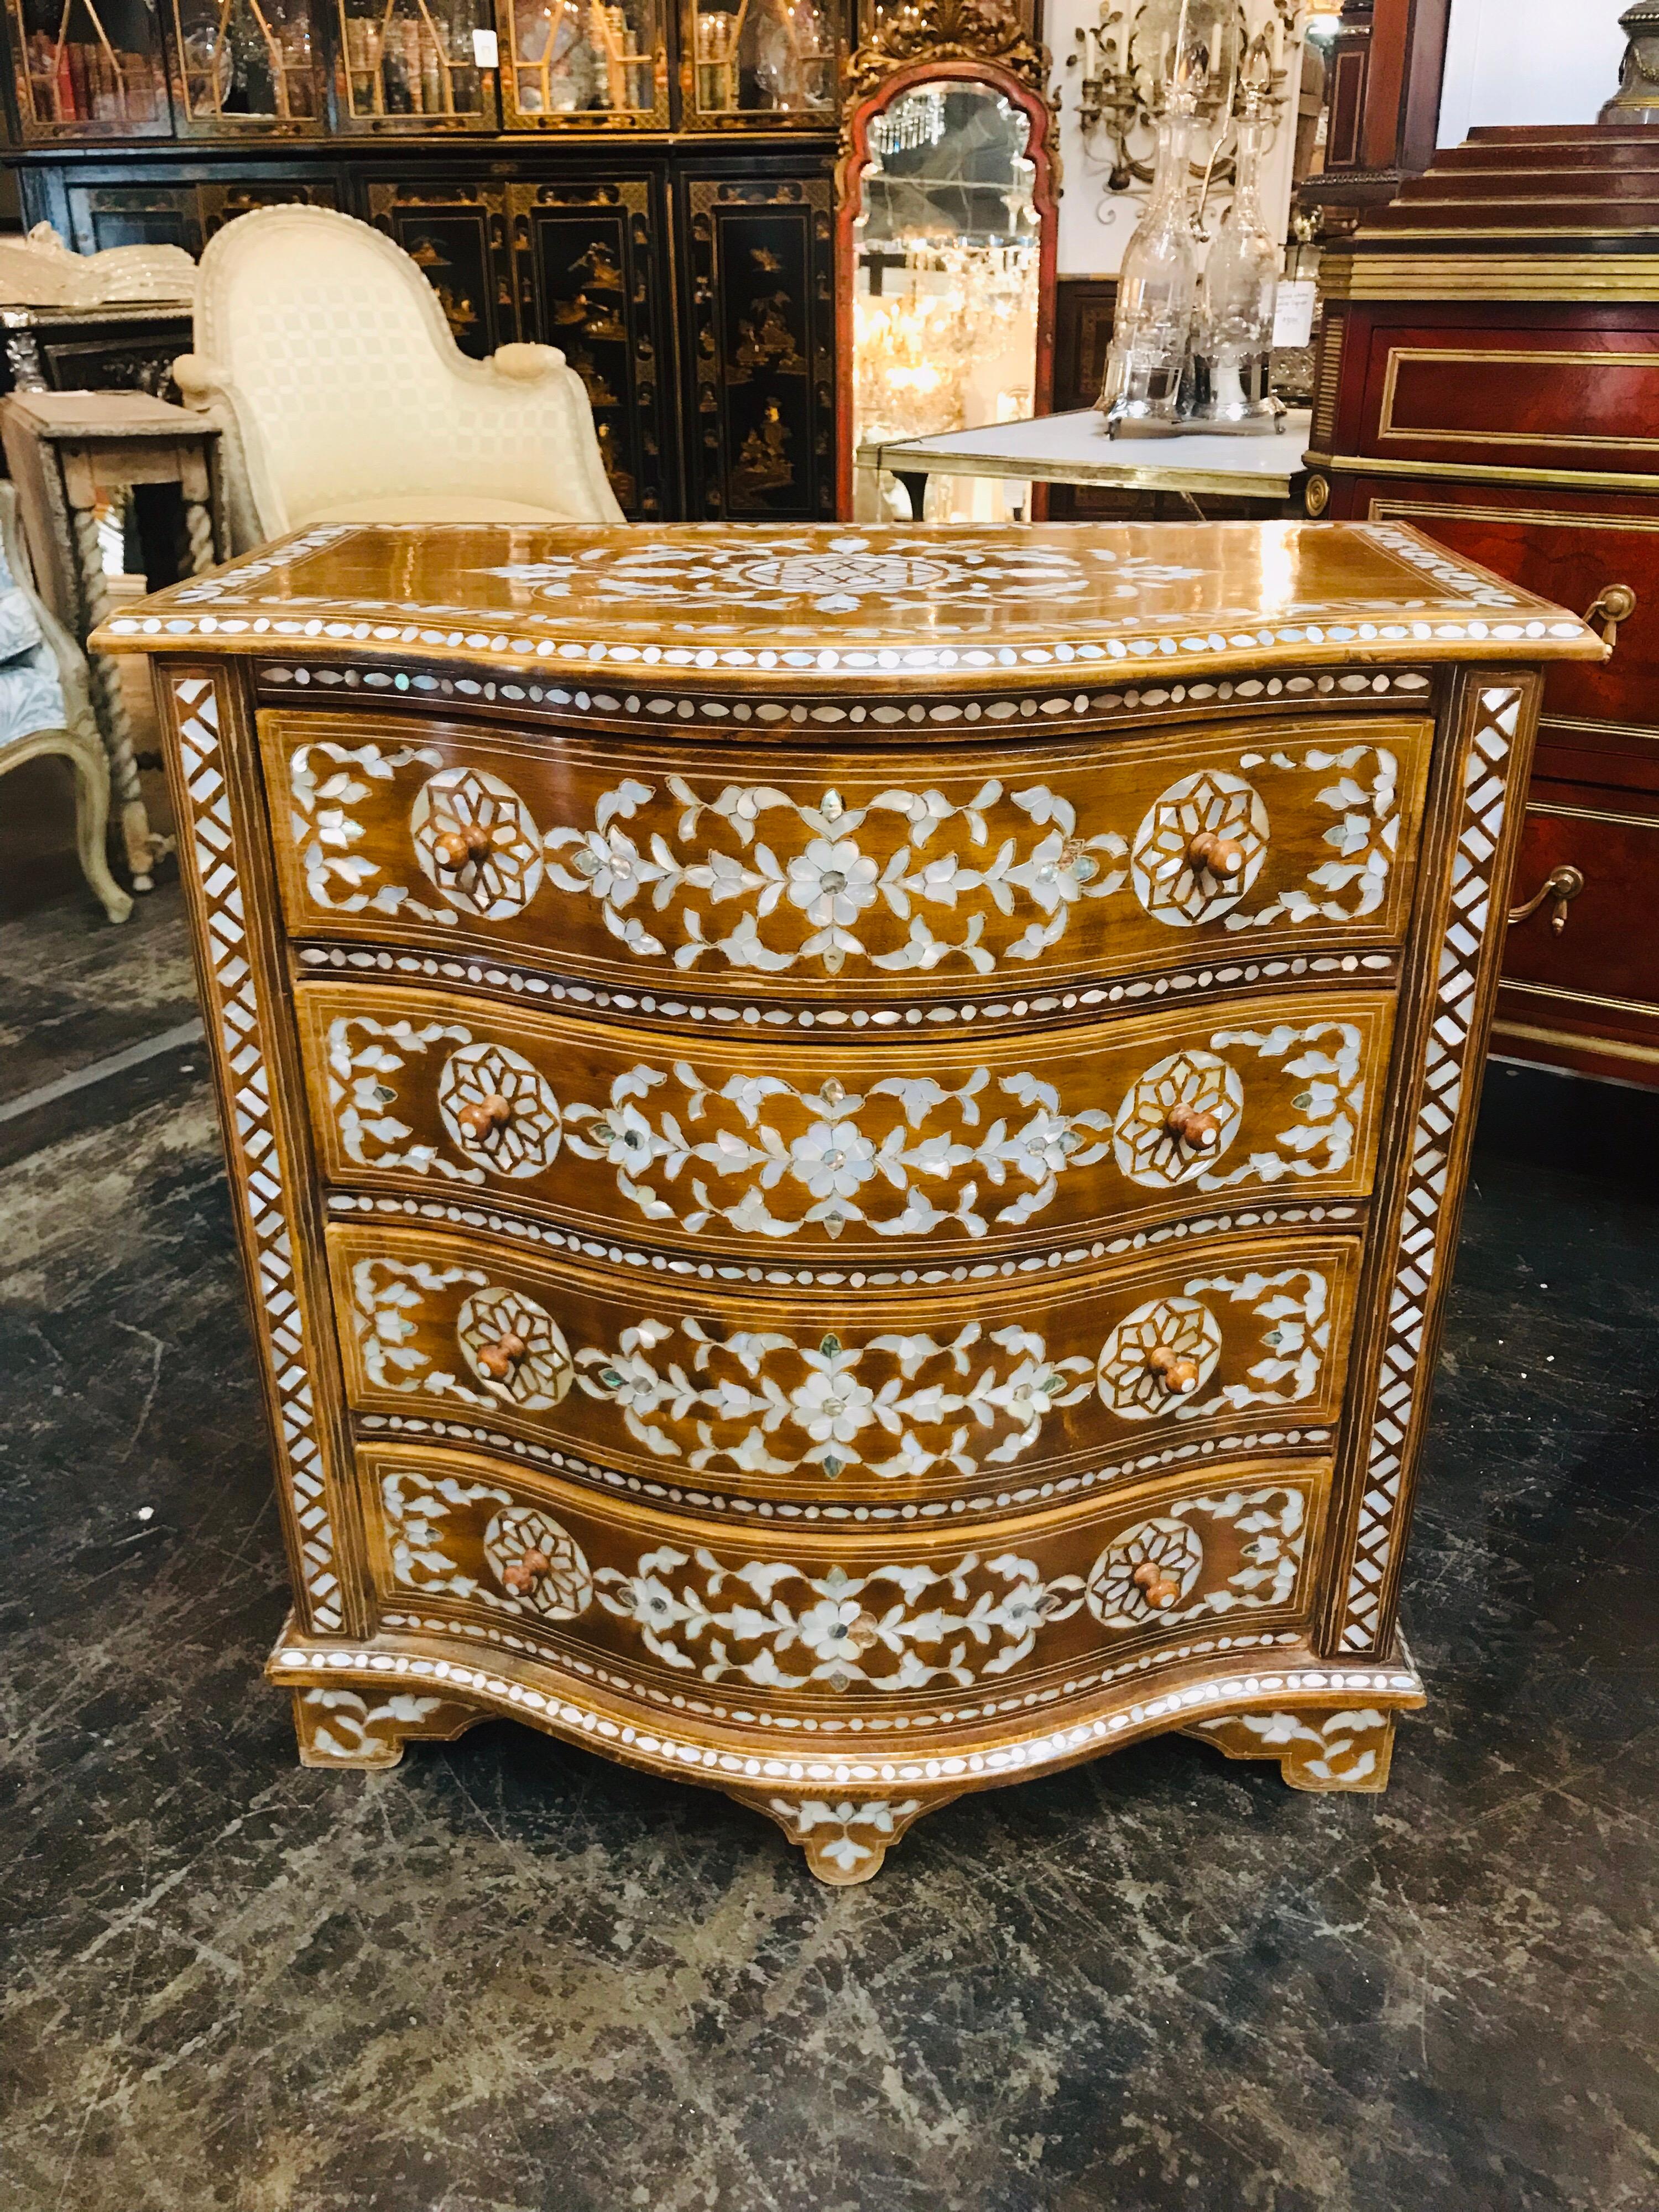 Beautiful Syrian chest in great medium size. The northern of pearl inlay truly “pops” making this chest a real head turner and statement piece. Perfect for today’s design and ready to mix with modern or fine antiques.